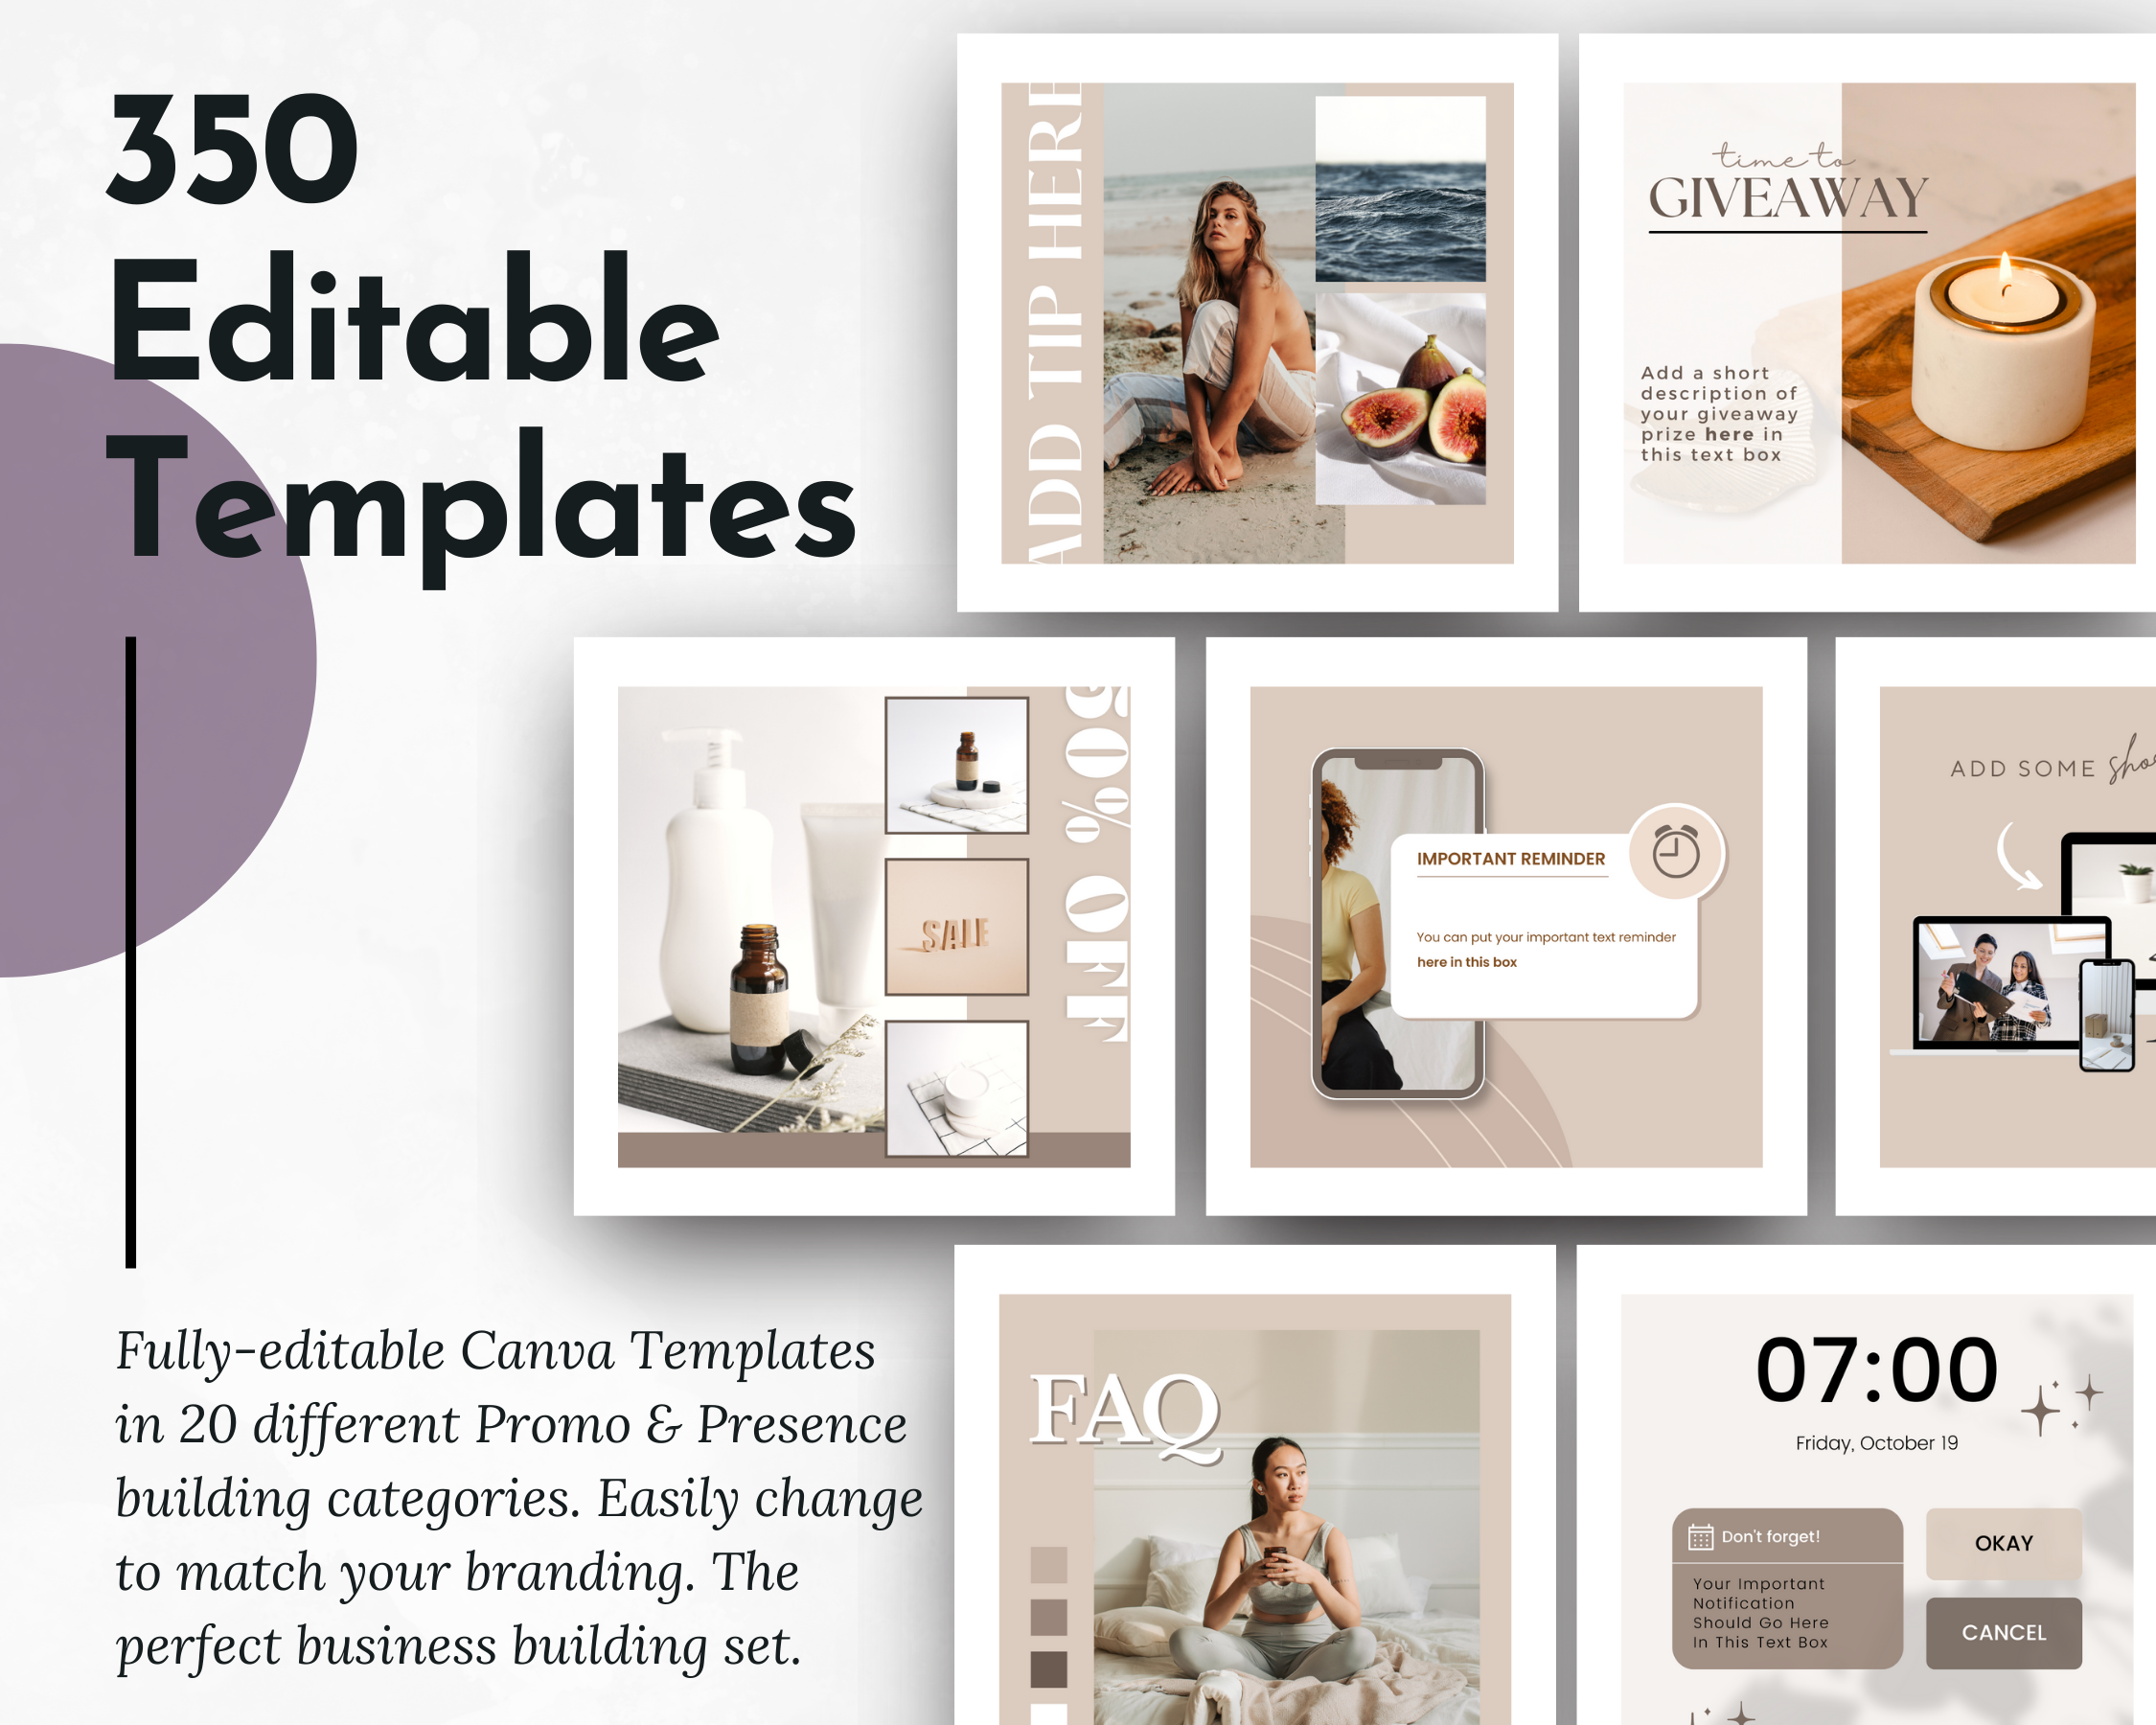 360 editable Instagram templates for creating engaging and visually appealing content on social media platforms. Enhance your online presence and promotional efforts with the Promo & Presence Social Media Post Bundle with Canva Templates from Socially Inclined, these SEO optimized images.